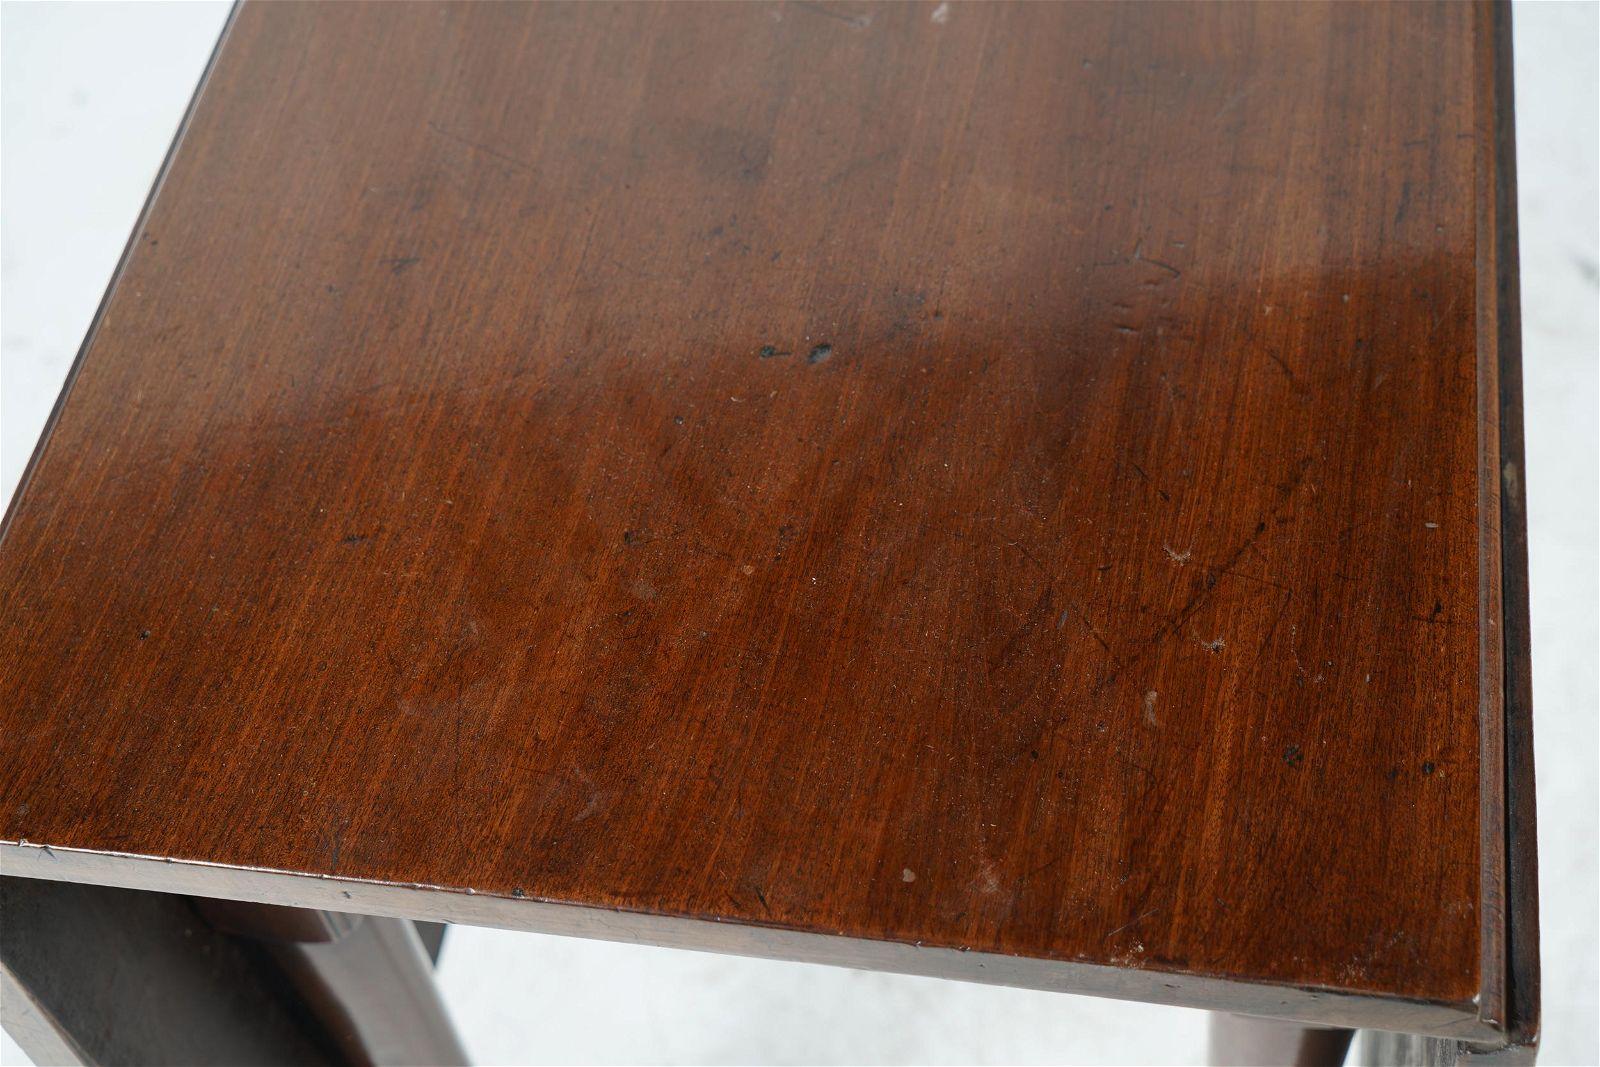 Hand-Crafted Antique Period English Queen Anne Mahogany Drop Leaf Table Late 18th Century For Sale